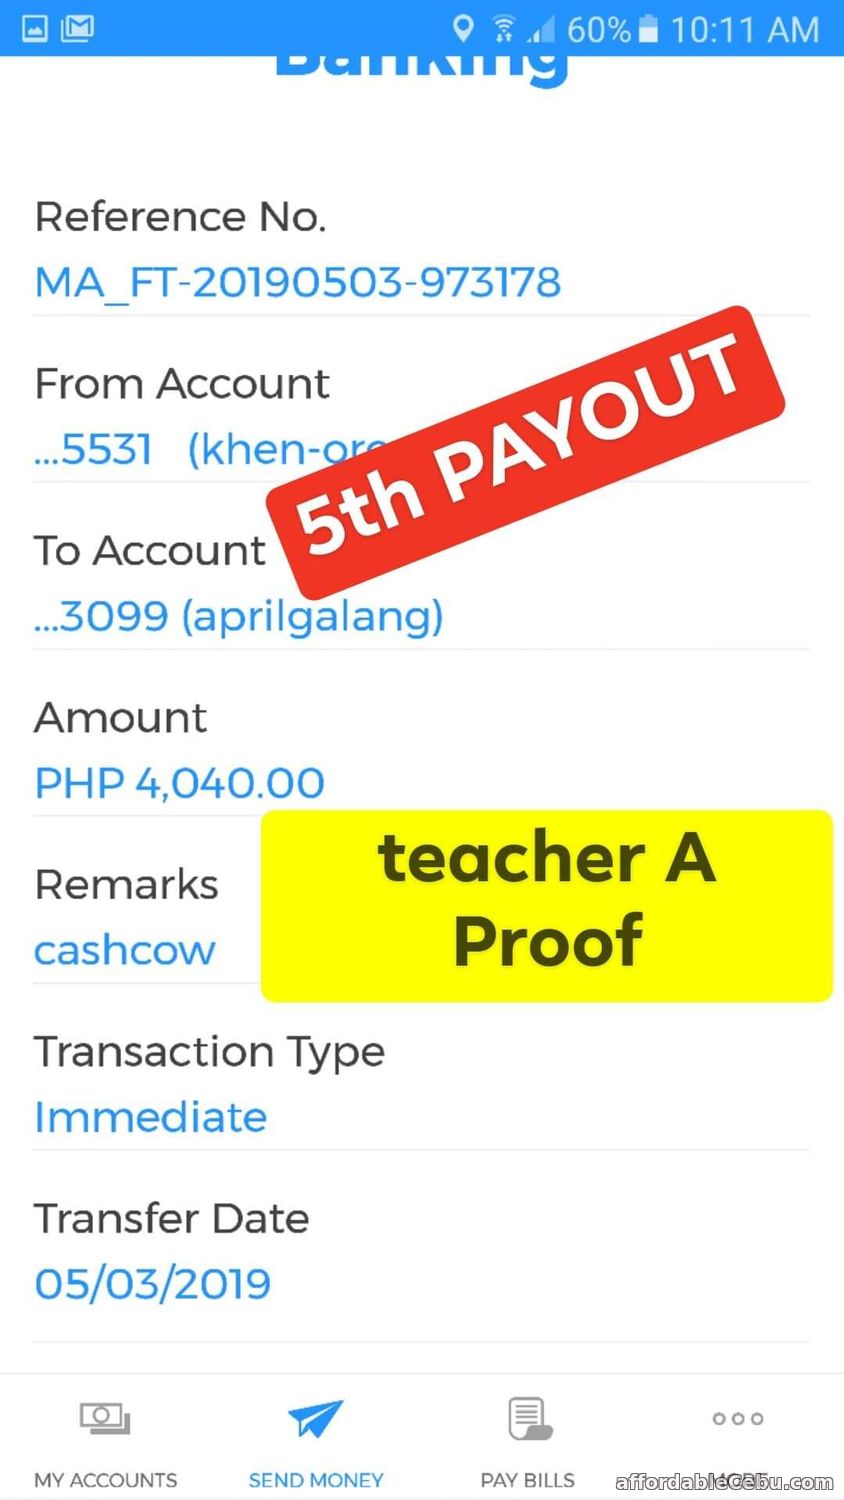 CashCowRobot Proof of Payout